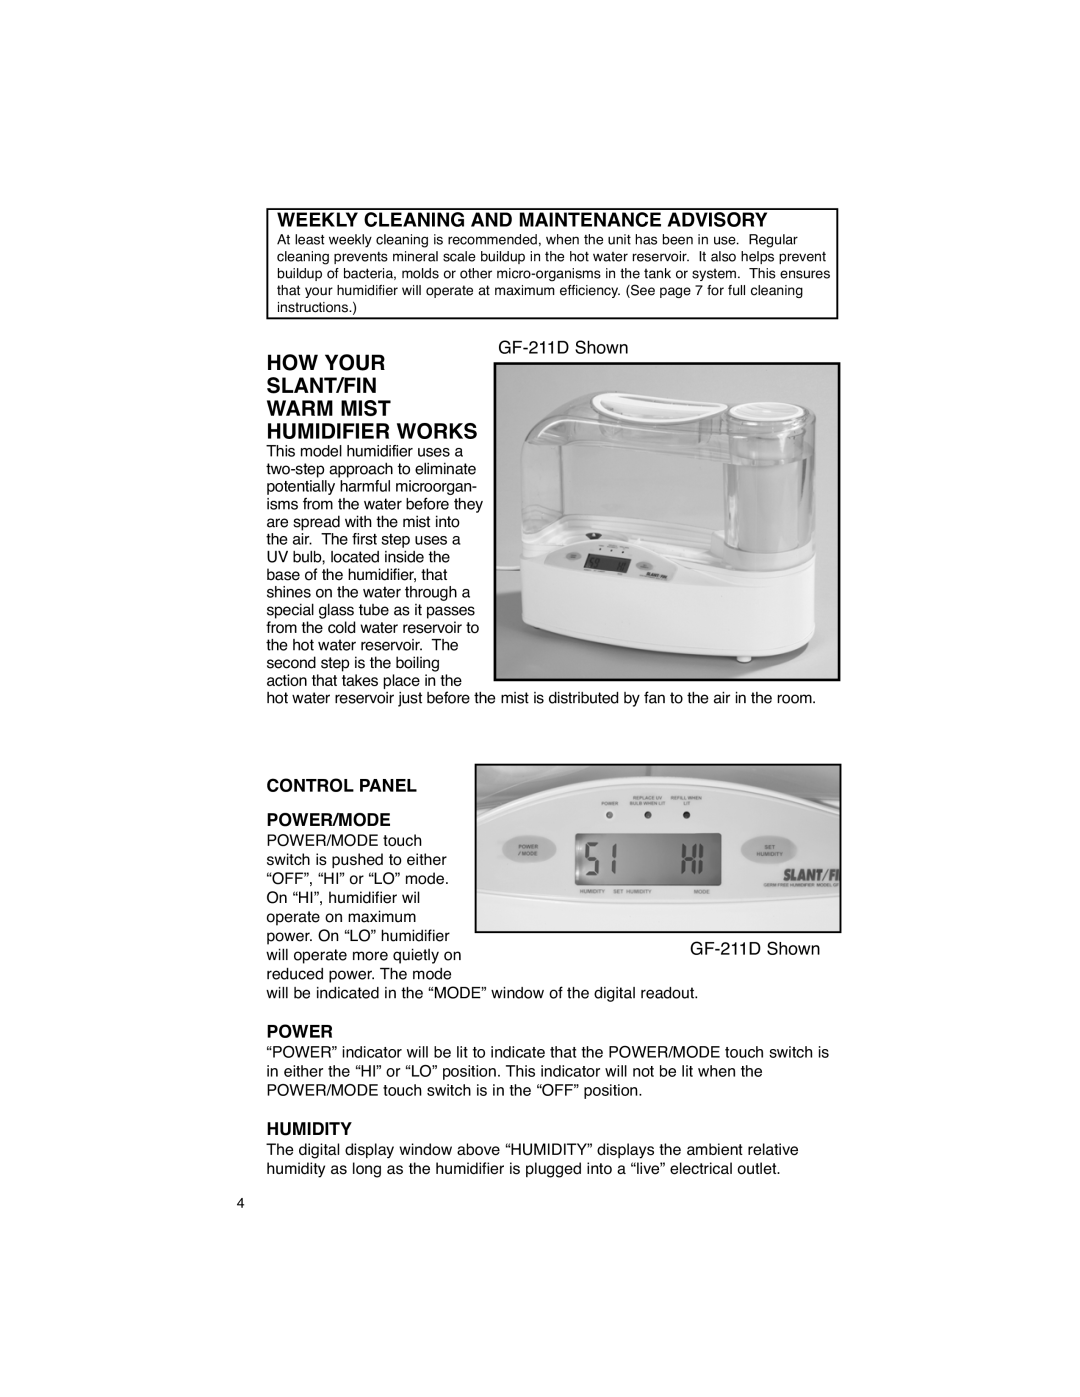 Slant/Fin GF-211D warranty Weekly Cleaning And Maintenance Advisory, How Your Slant/Fin Warm Mist Humidifier Works 